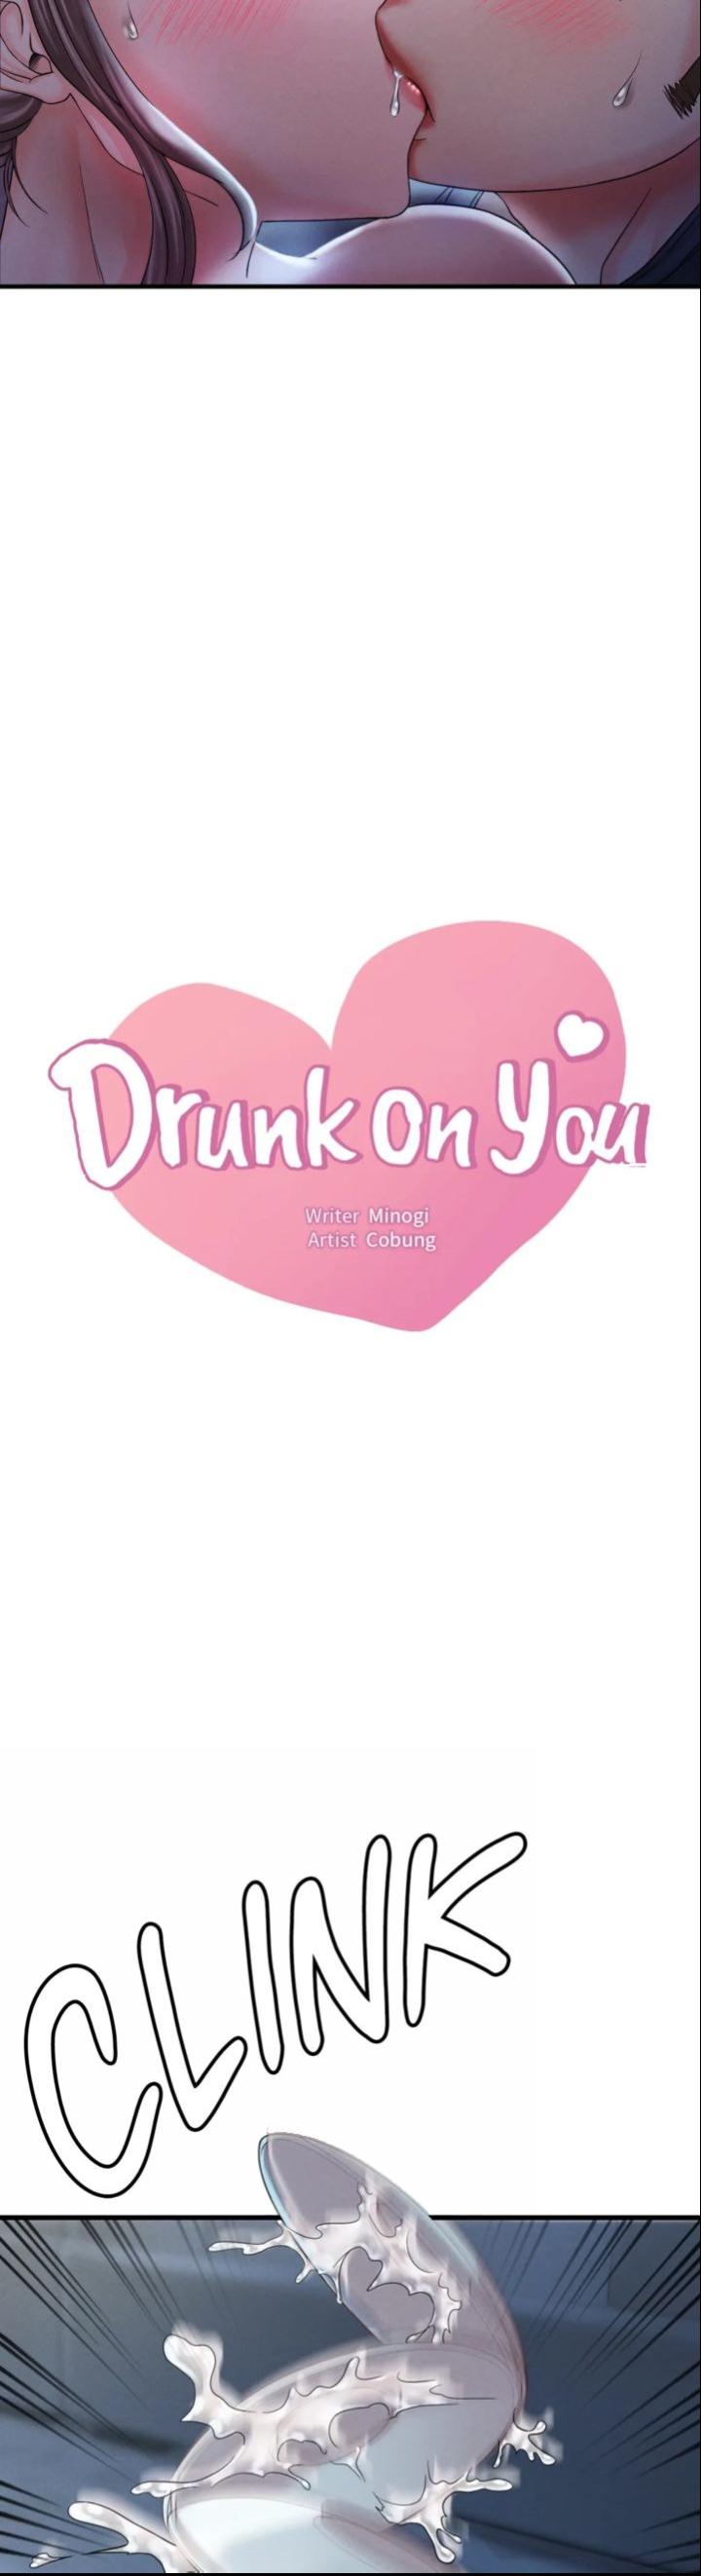 drunk on you 1-6 348